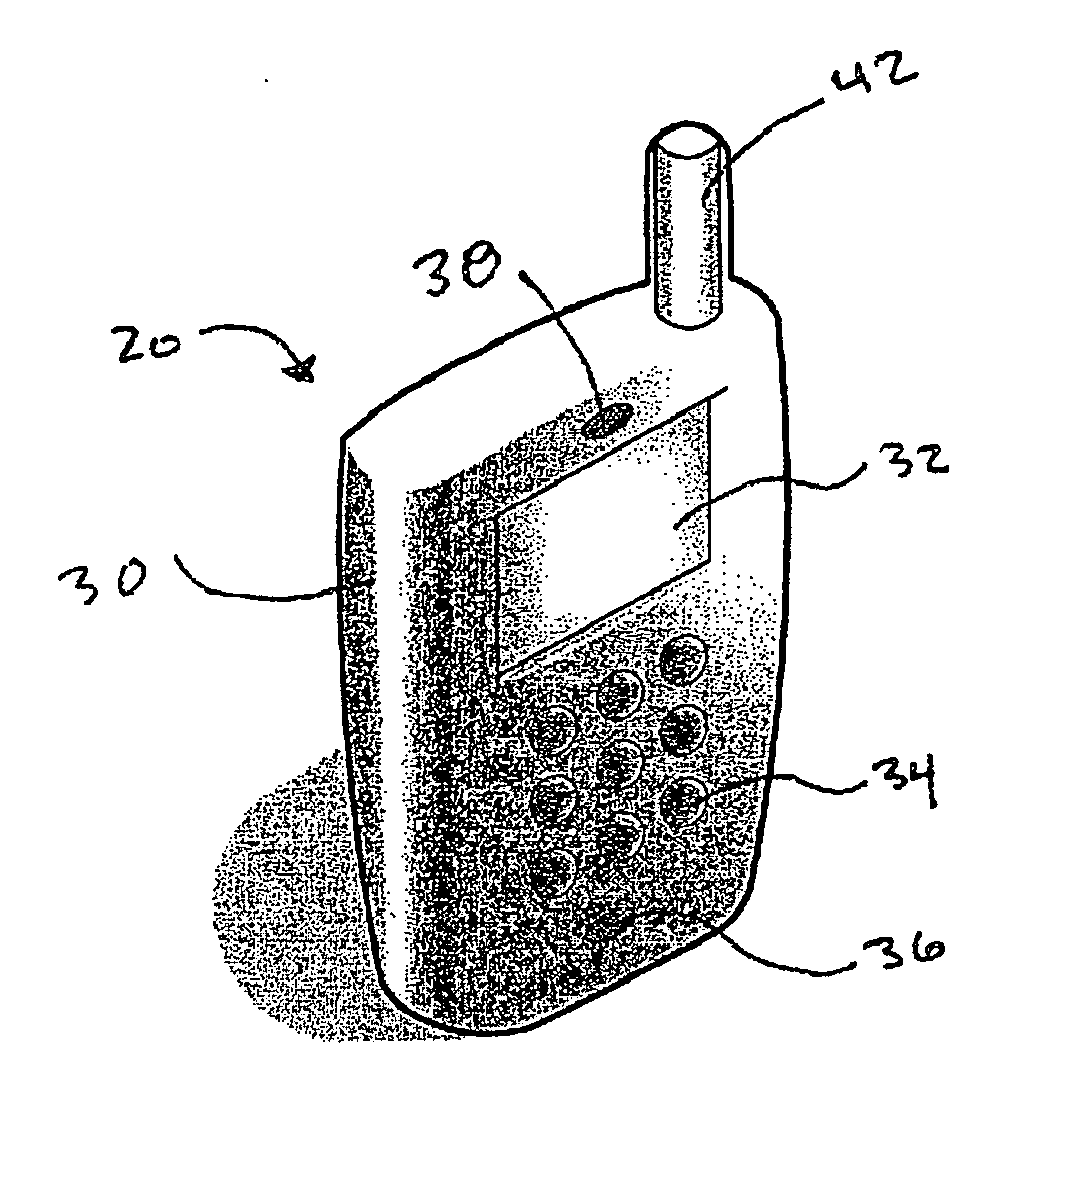 Antenna configured for low frequency application